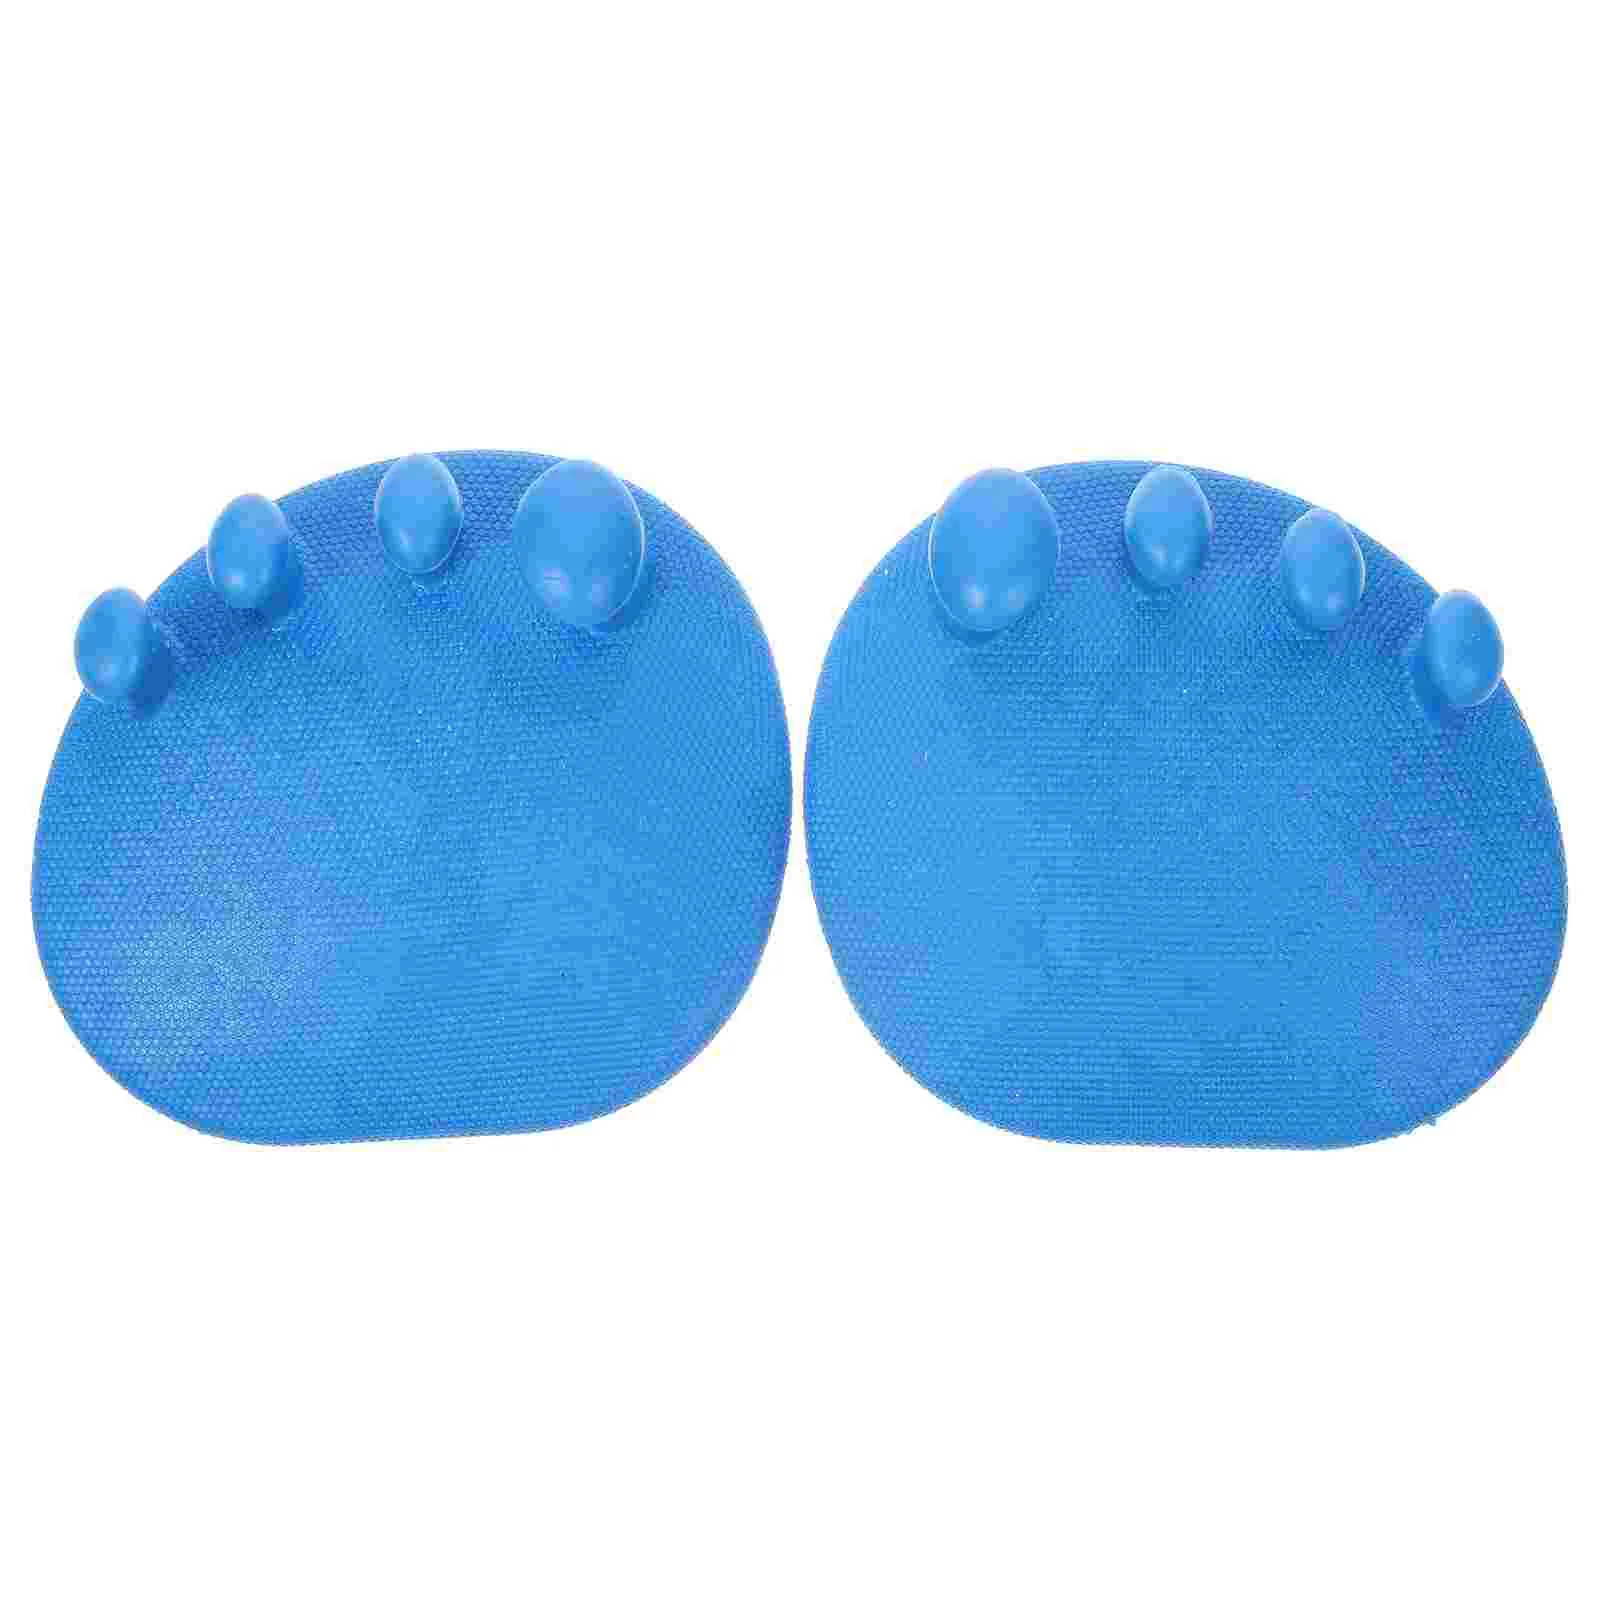 

Toe Foot Separator Hammer Corrector Toes Separators Finger Divider Nail Bunion Stretcher Spacers Straightener Overlapping Polish